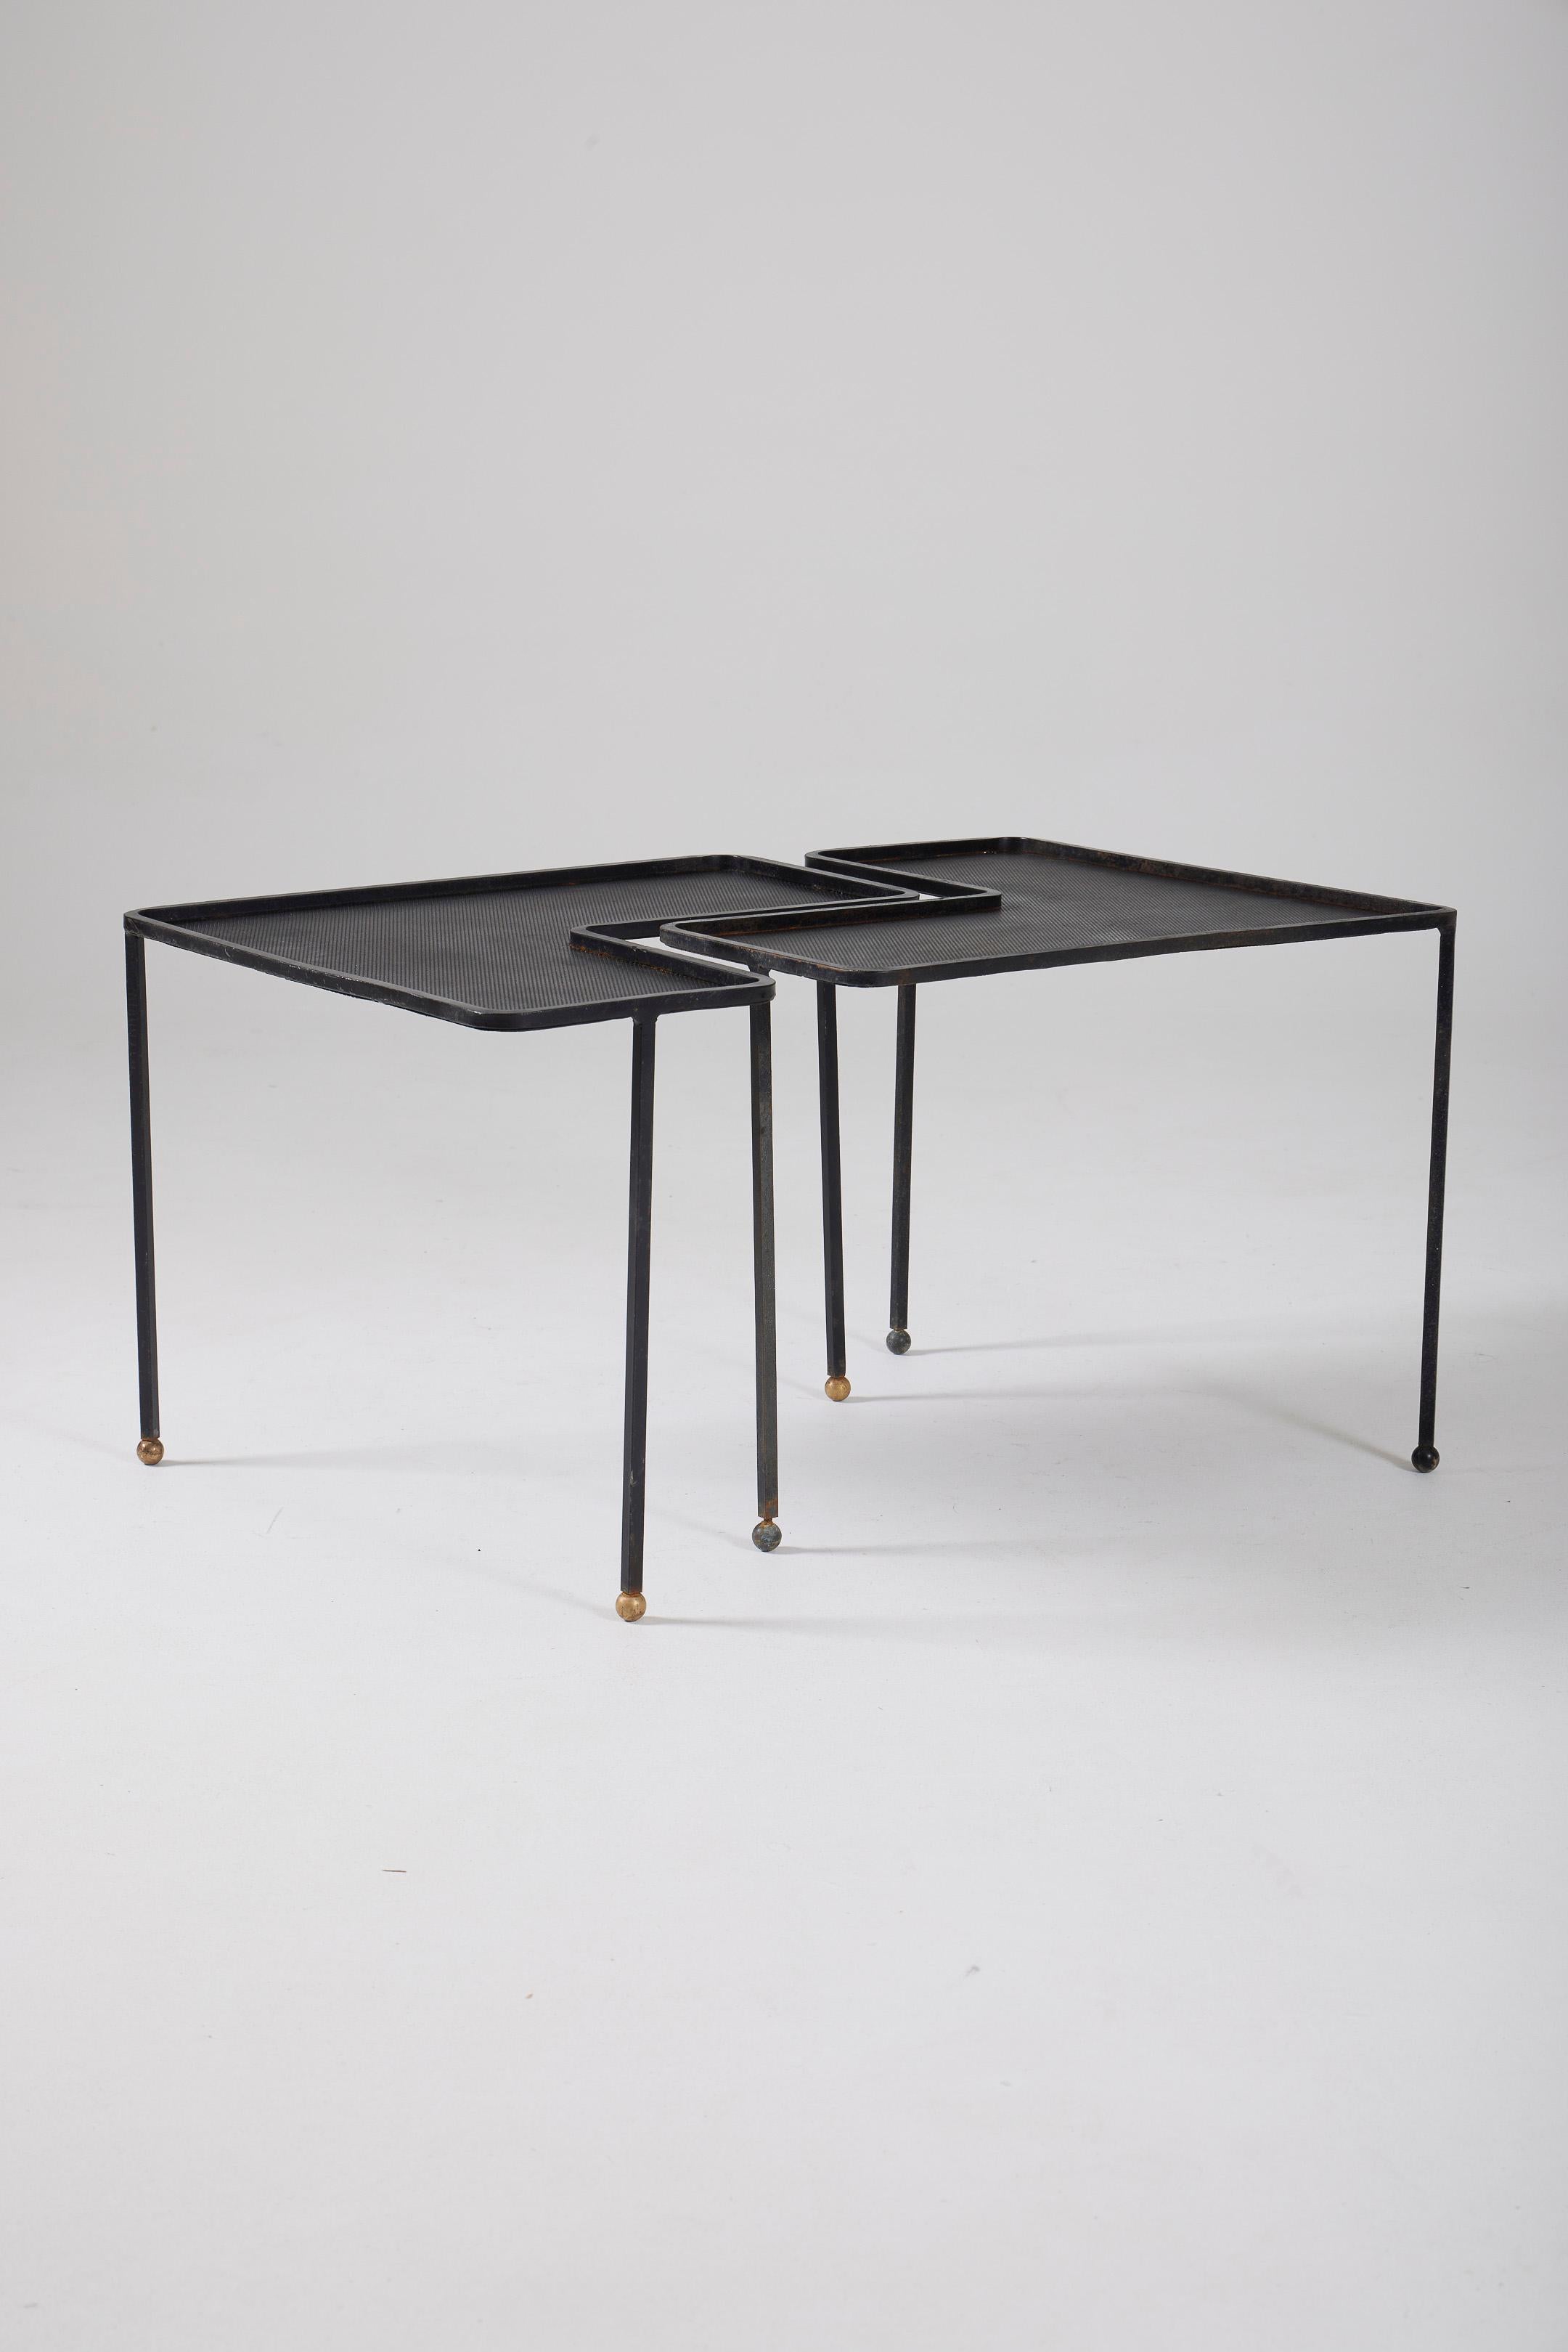 Set of 2 tables model 'Domino' by French designer Mathieu Matégot (1910-2001) in the 1950s (1953). These tables feature a black perforated metal top with a tubular black lacquered metal base. Good condition.
DV570